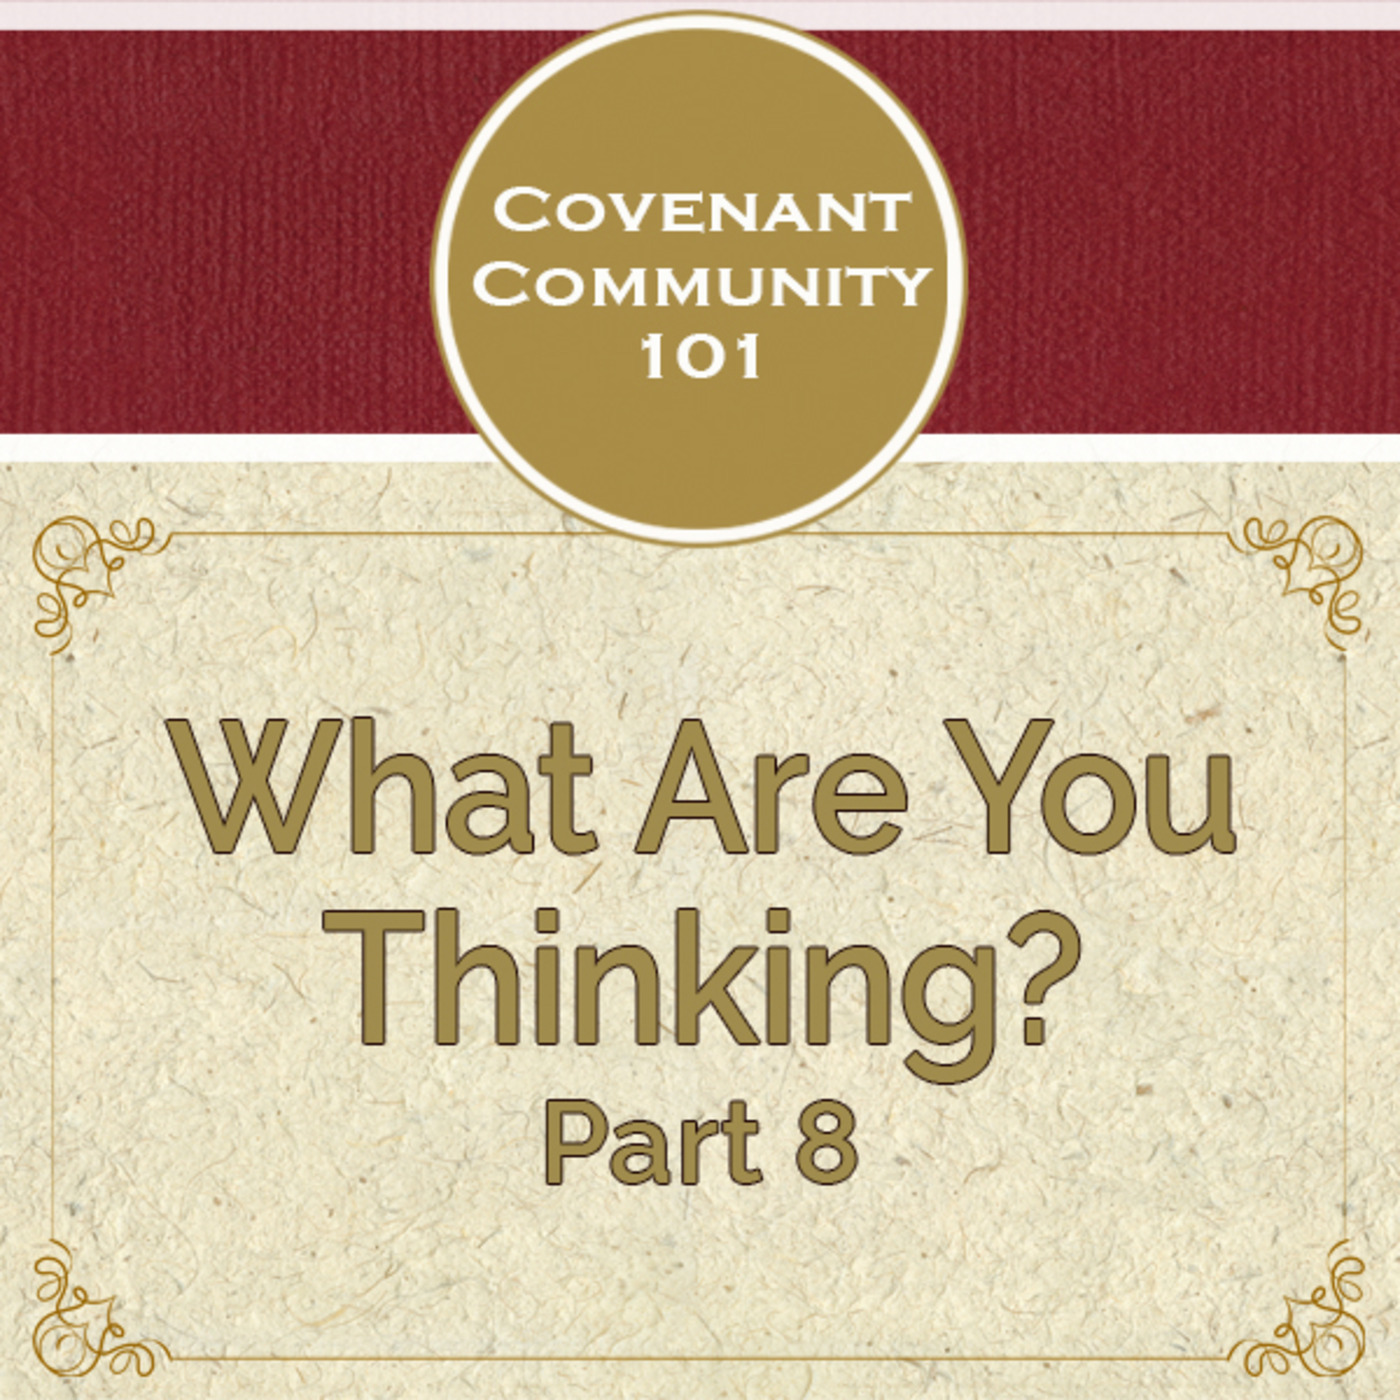 Covenant Community 101: What Are You Thinking? - Part 8